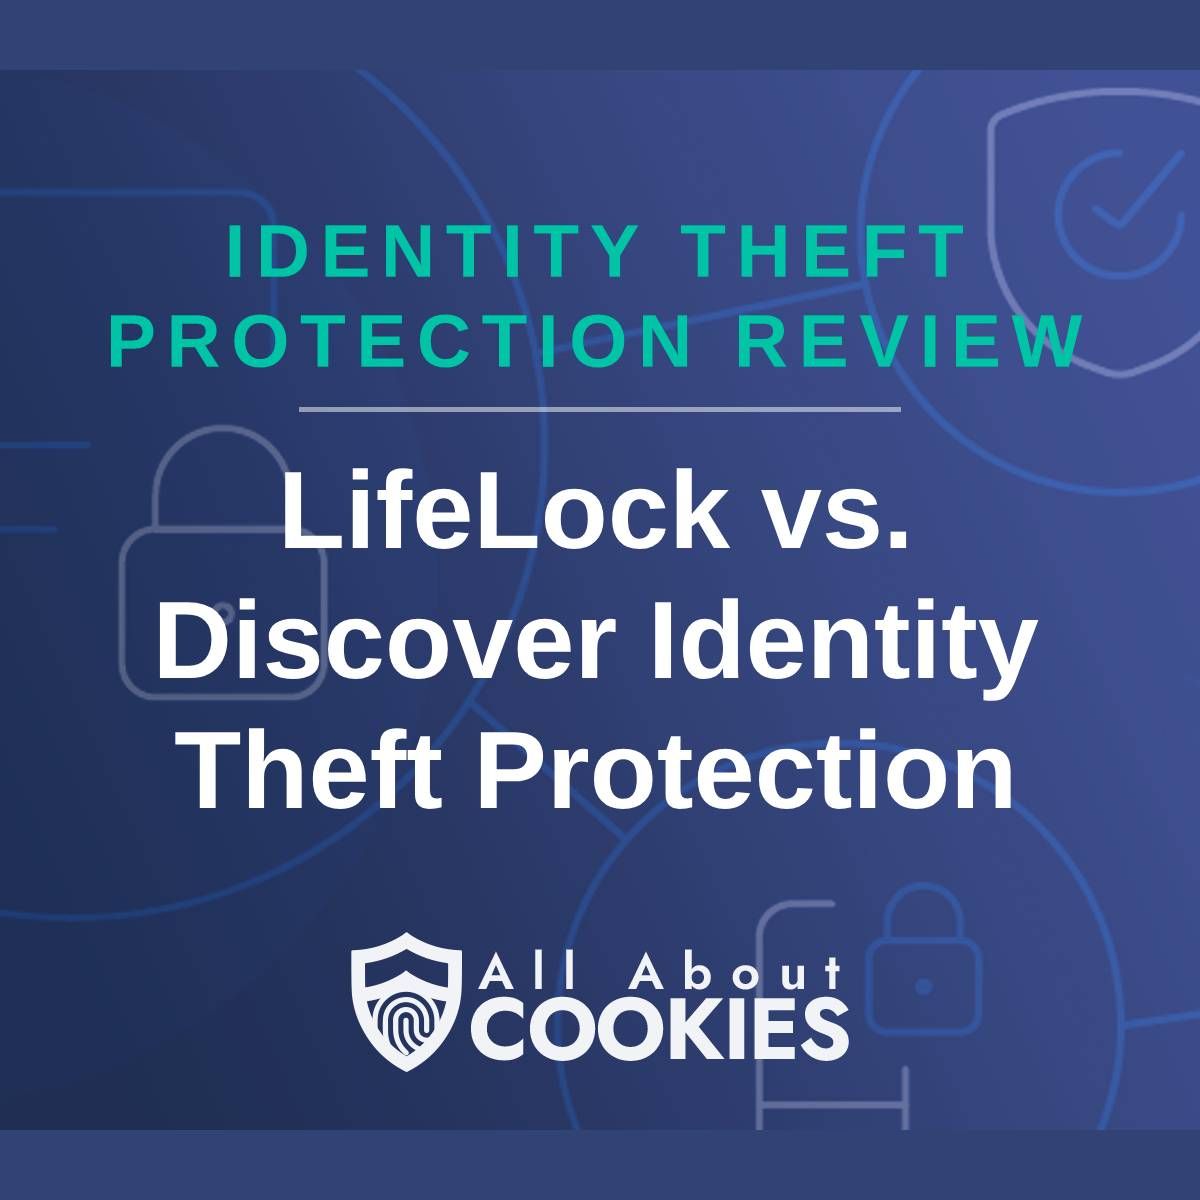 A blue background with images of locks and shields with the text "Identity Theft Protection Review LifeLock vs Discover Identity Theft Protection" and the All About Cookies logo. 